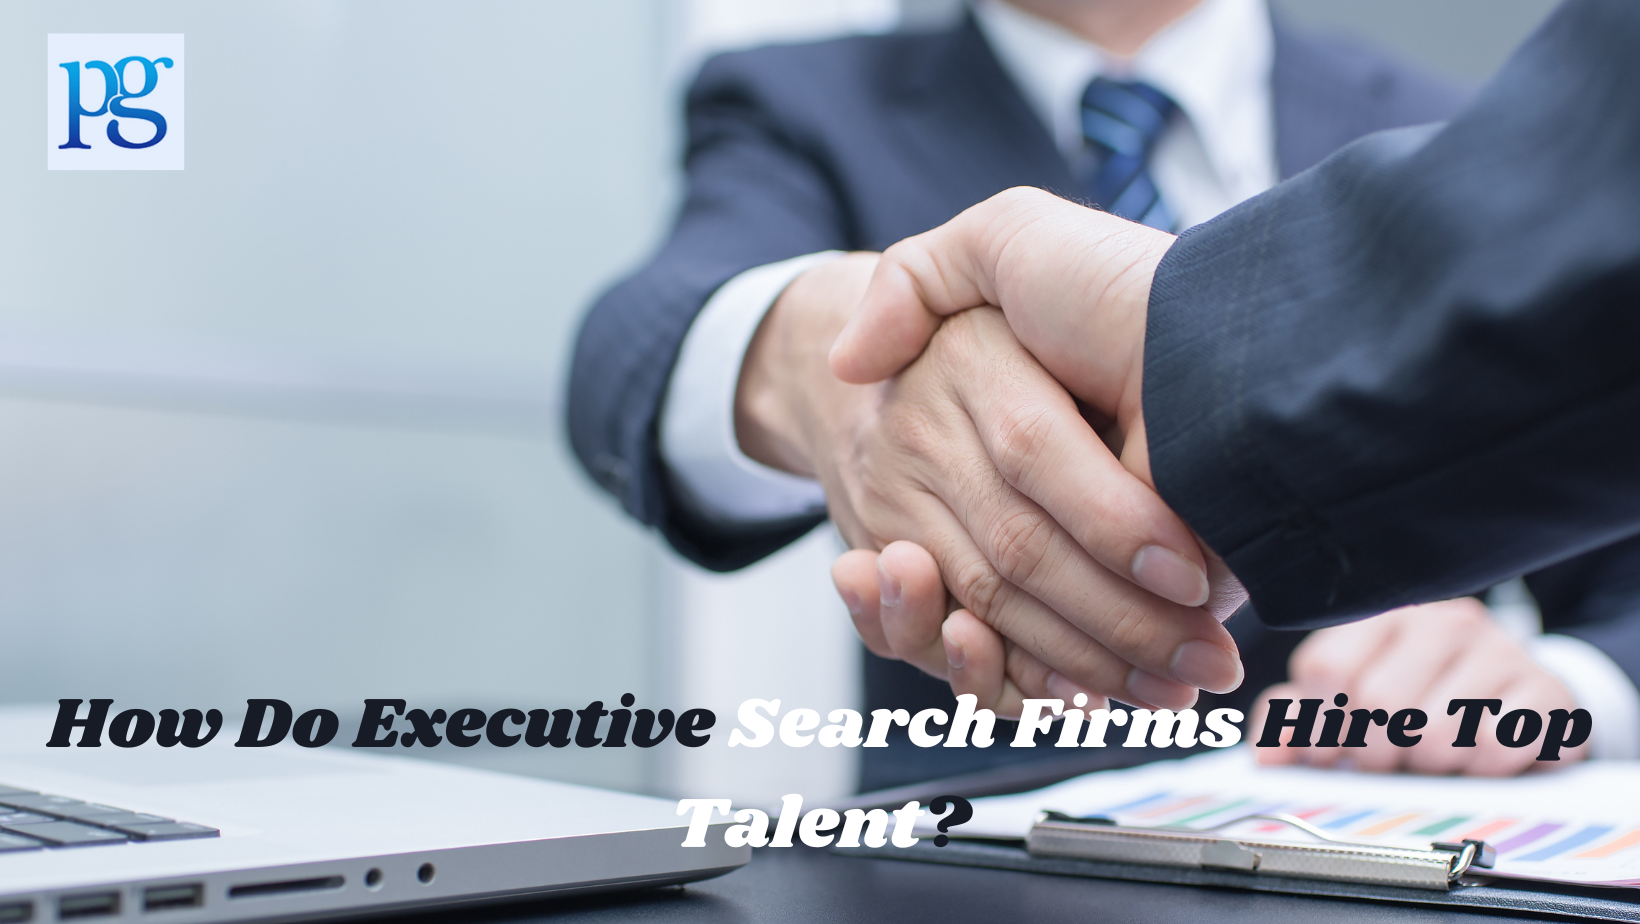 How Do Executive Search Firms Hire Top Talent?